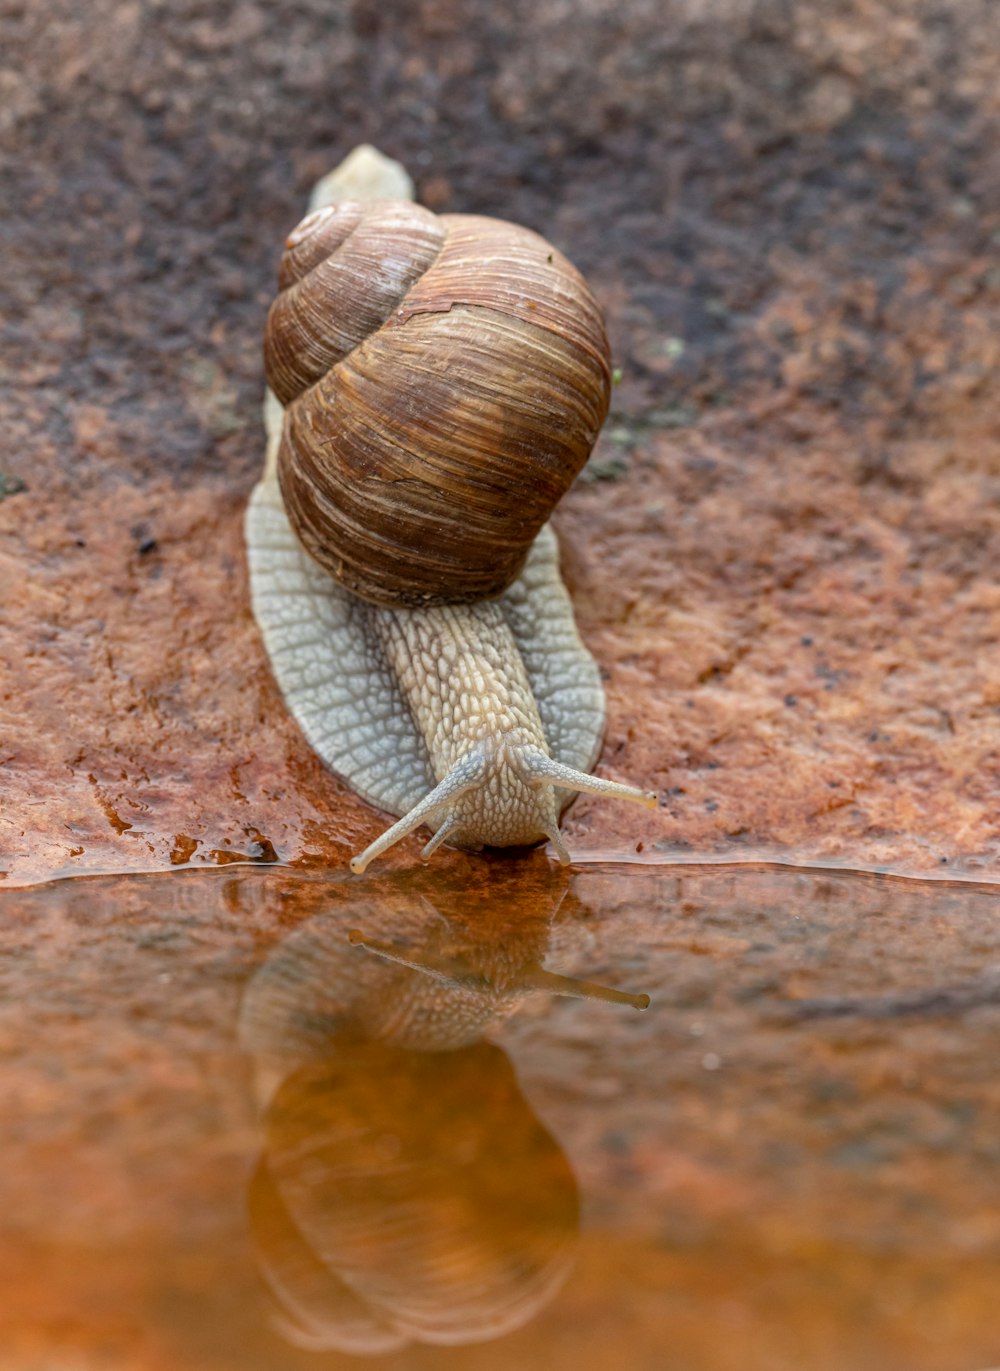 brown snail beside calm water at daytime